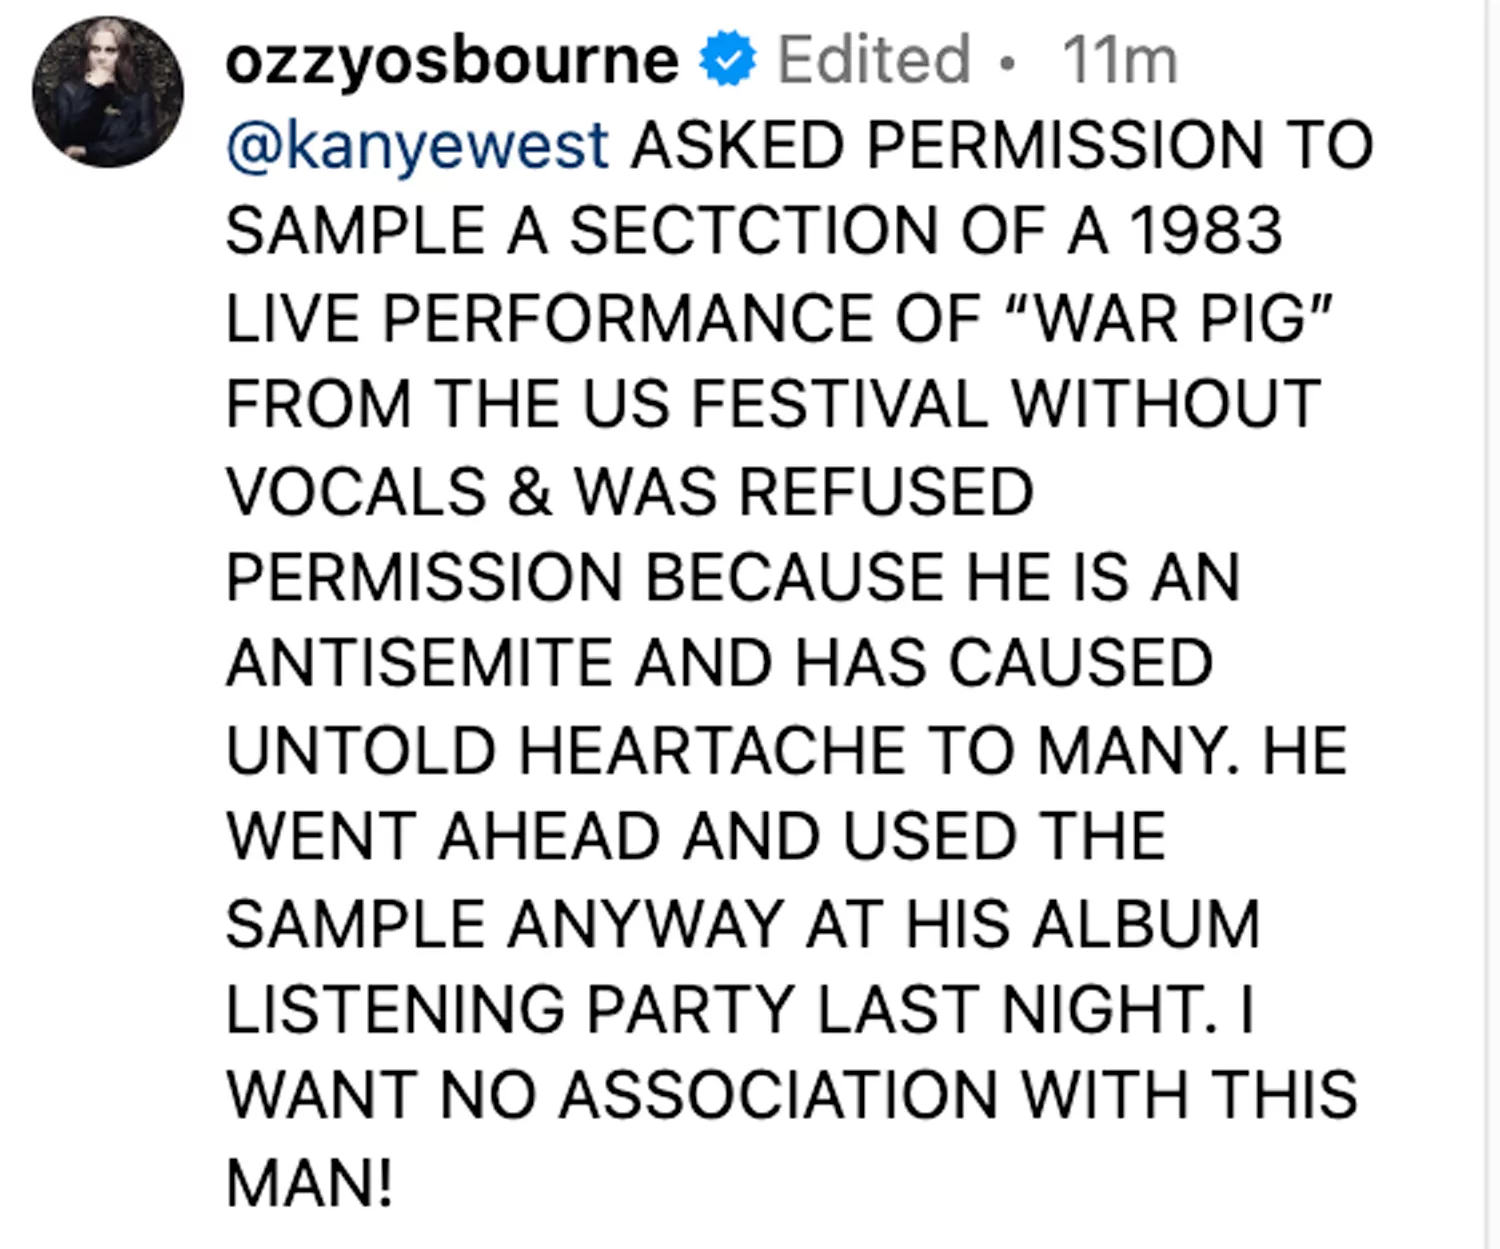 Ozzy Osbourne Blasts Antisemite Kanye West For Sampling His Music Without Permission